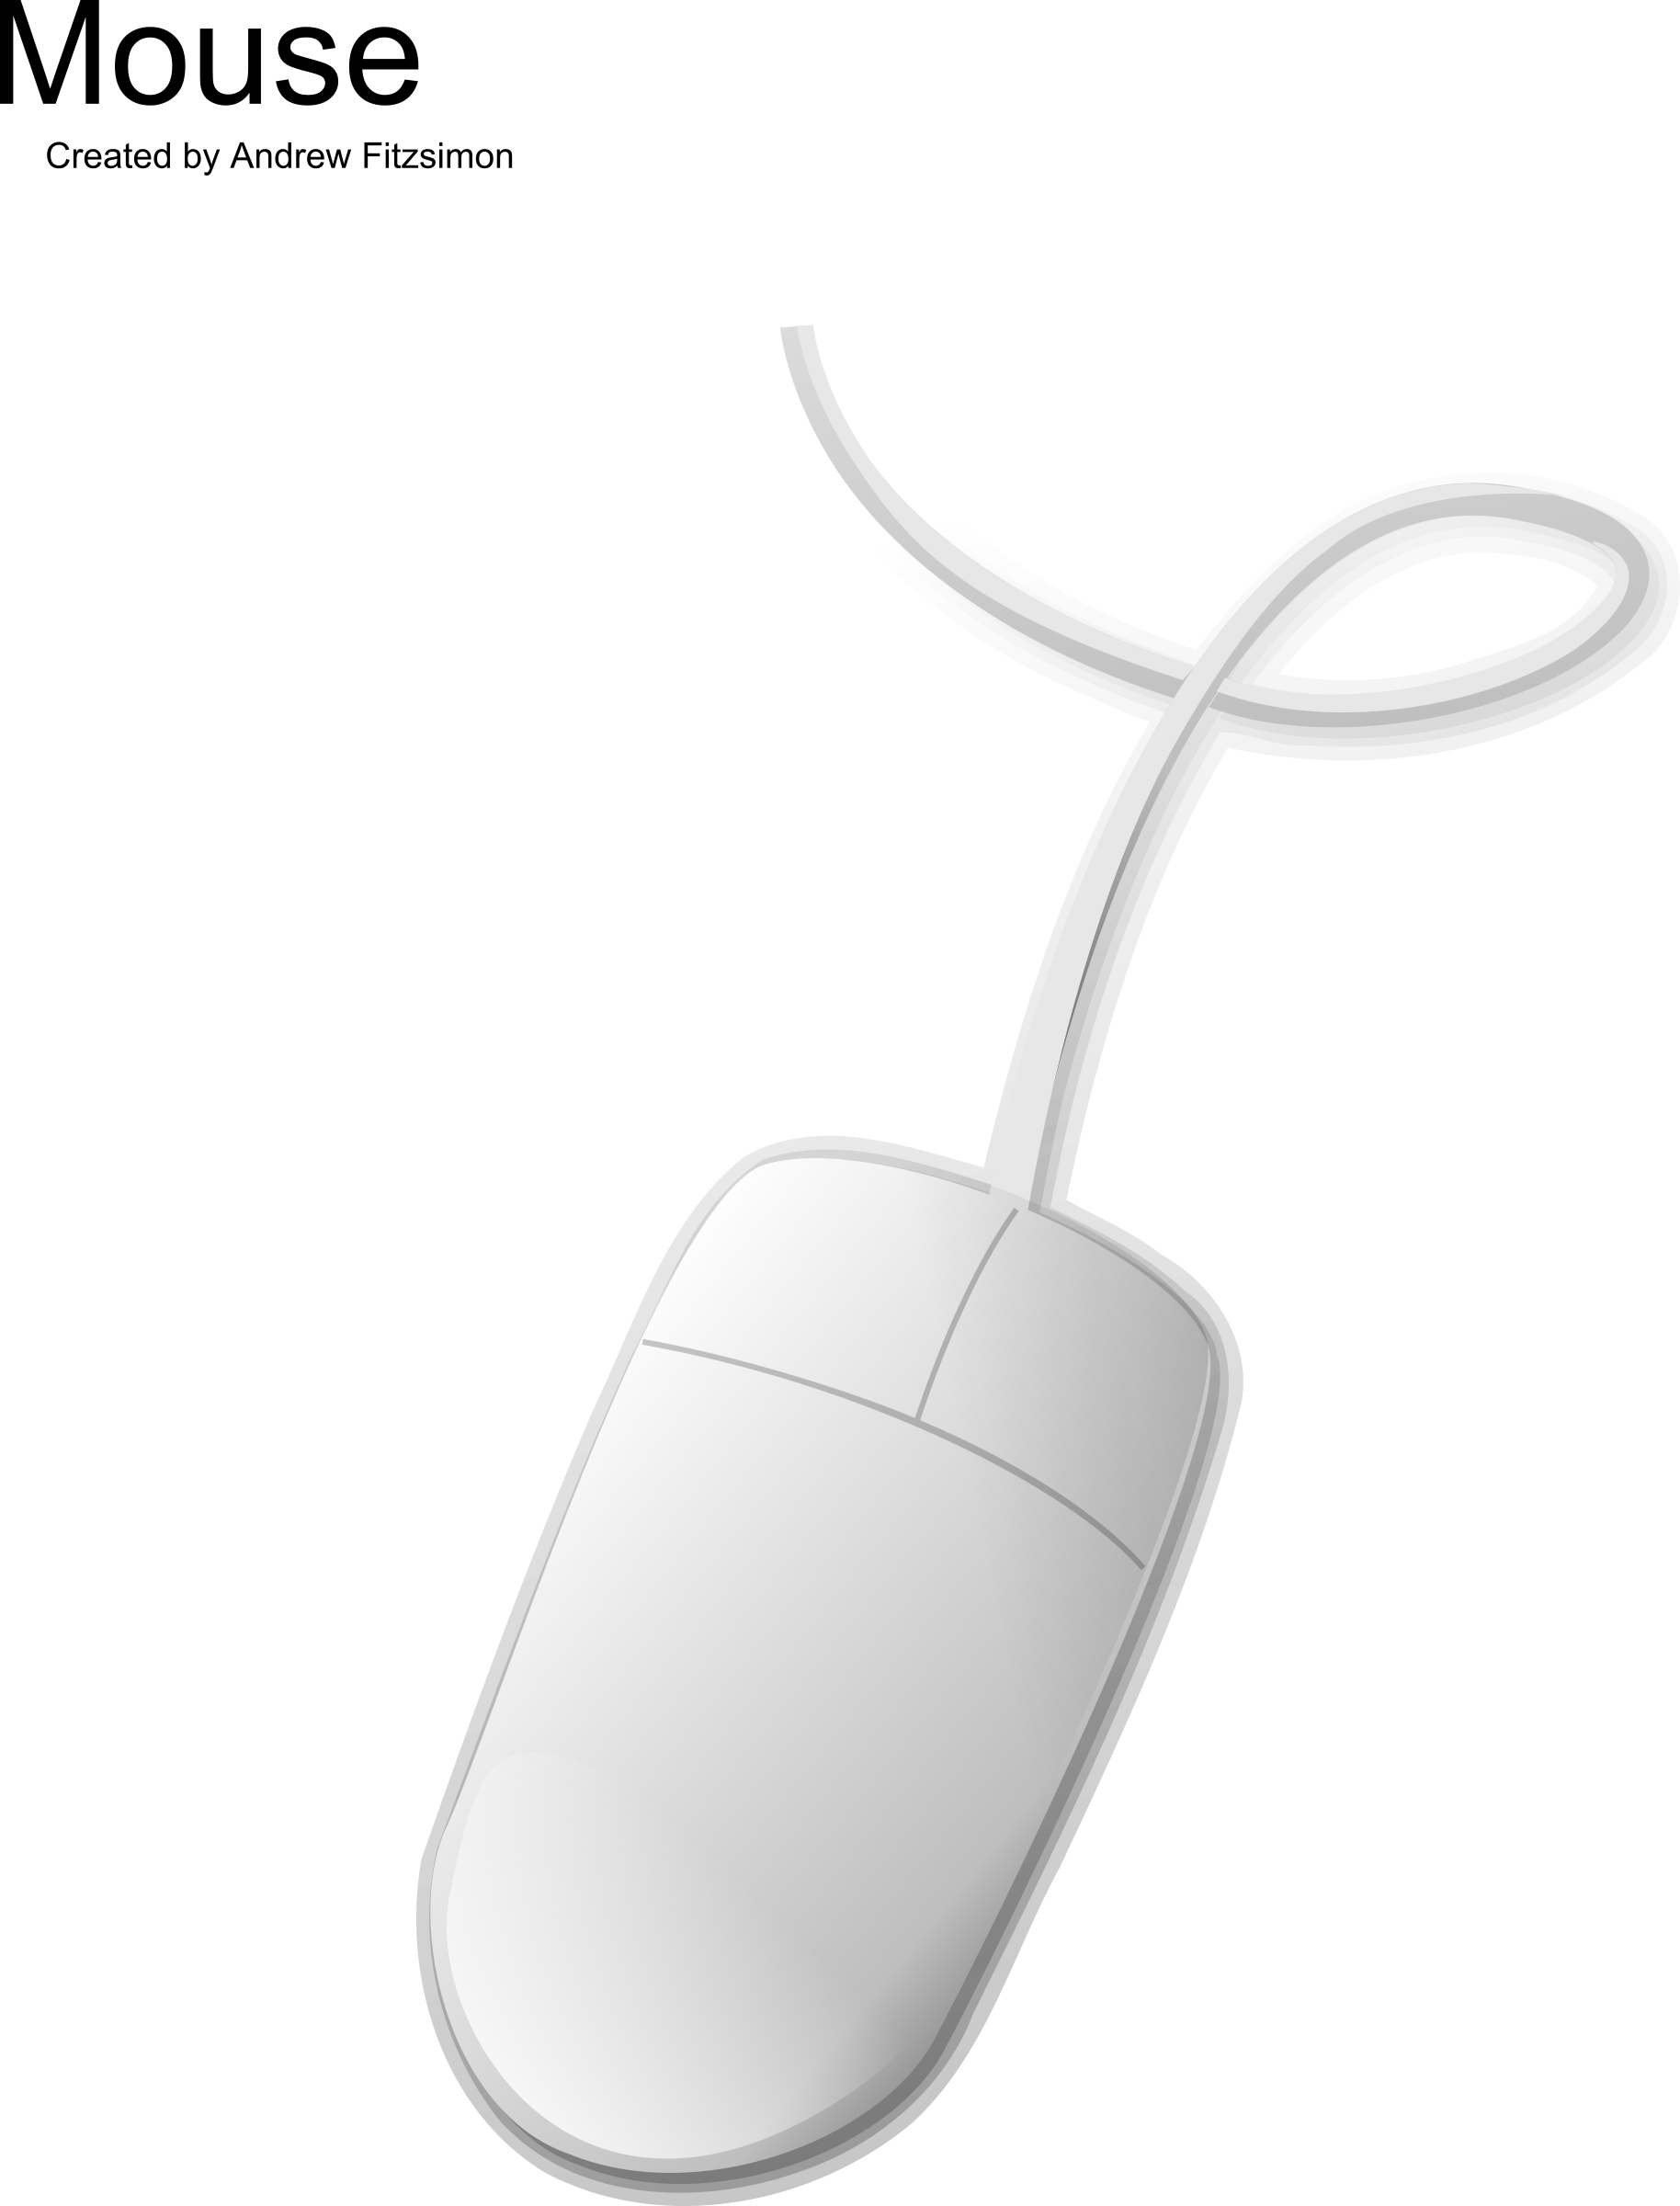 Big image png. White clipart computer mouse